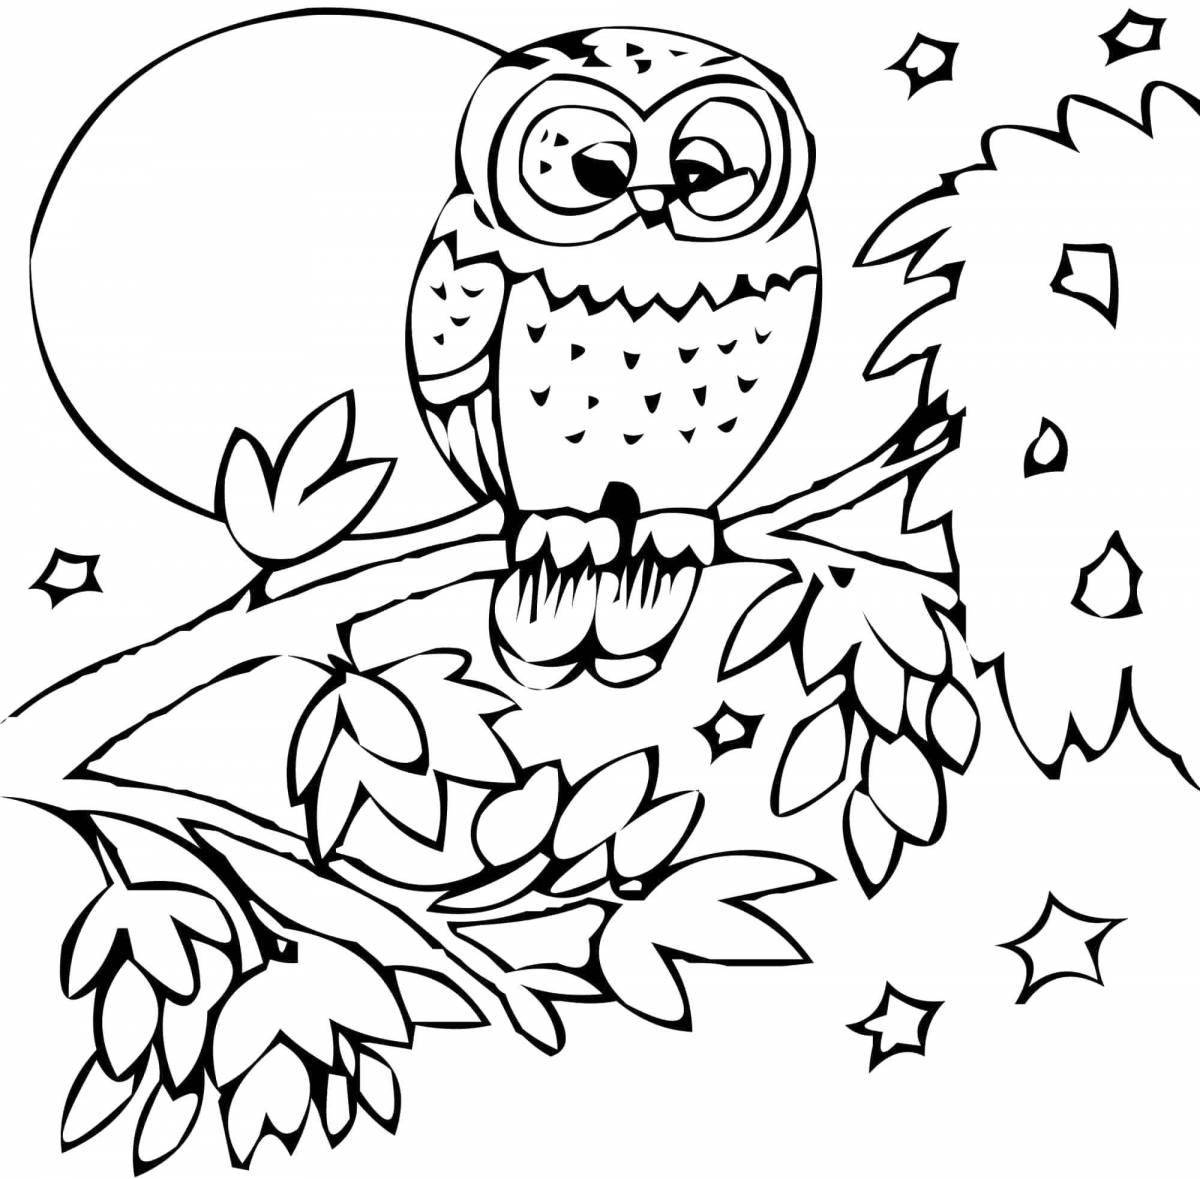 Perfect owl coloring by numbers